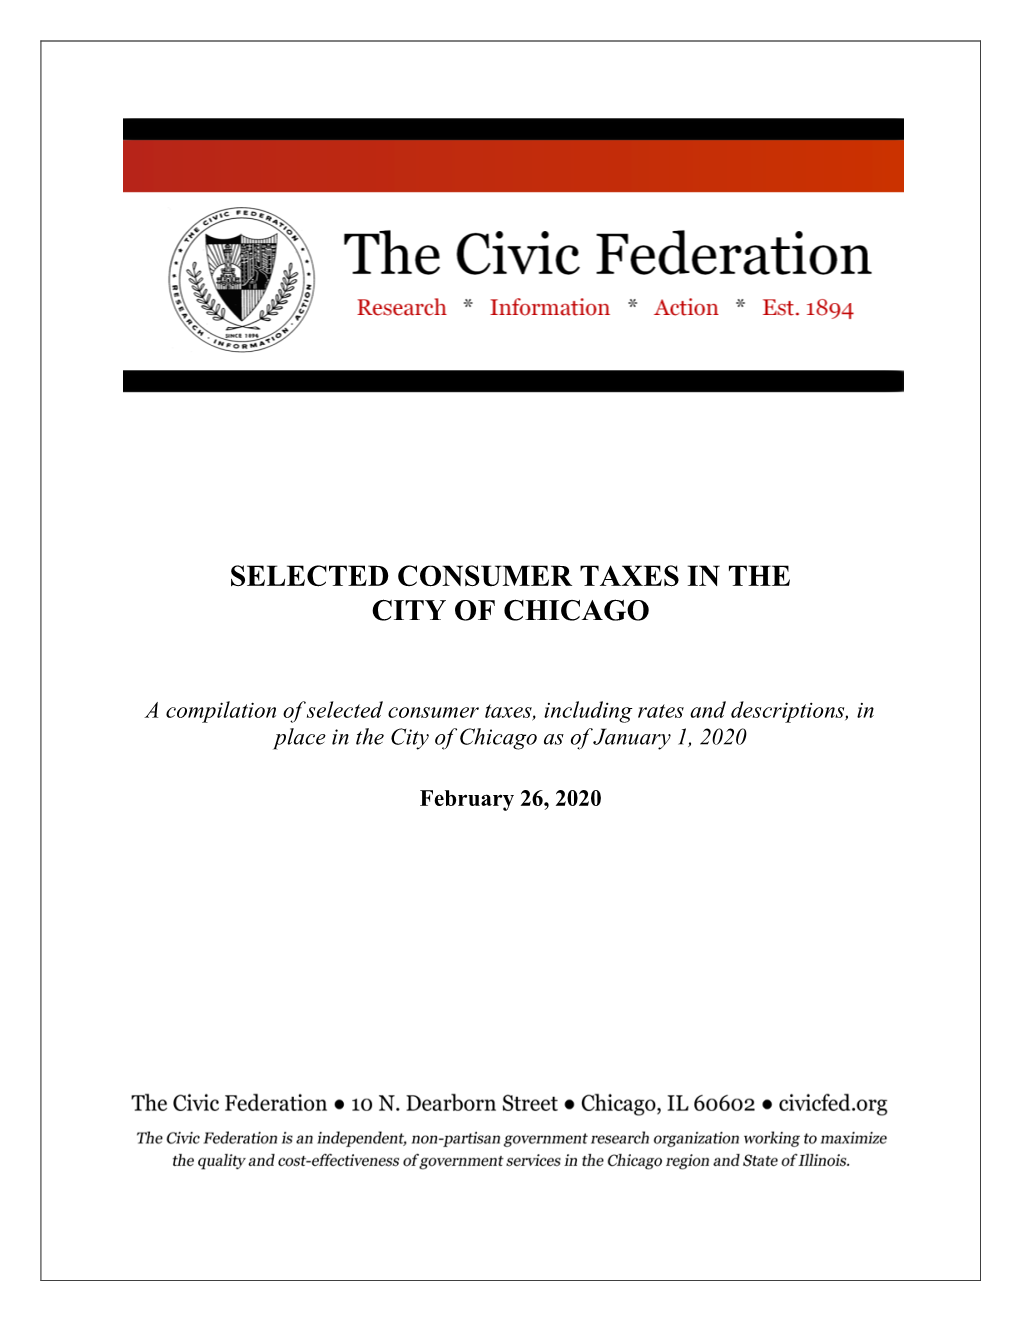 Taxes in the City of Chicago